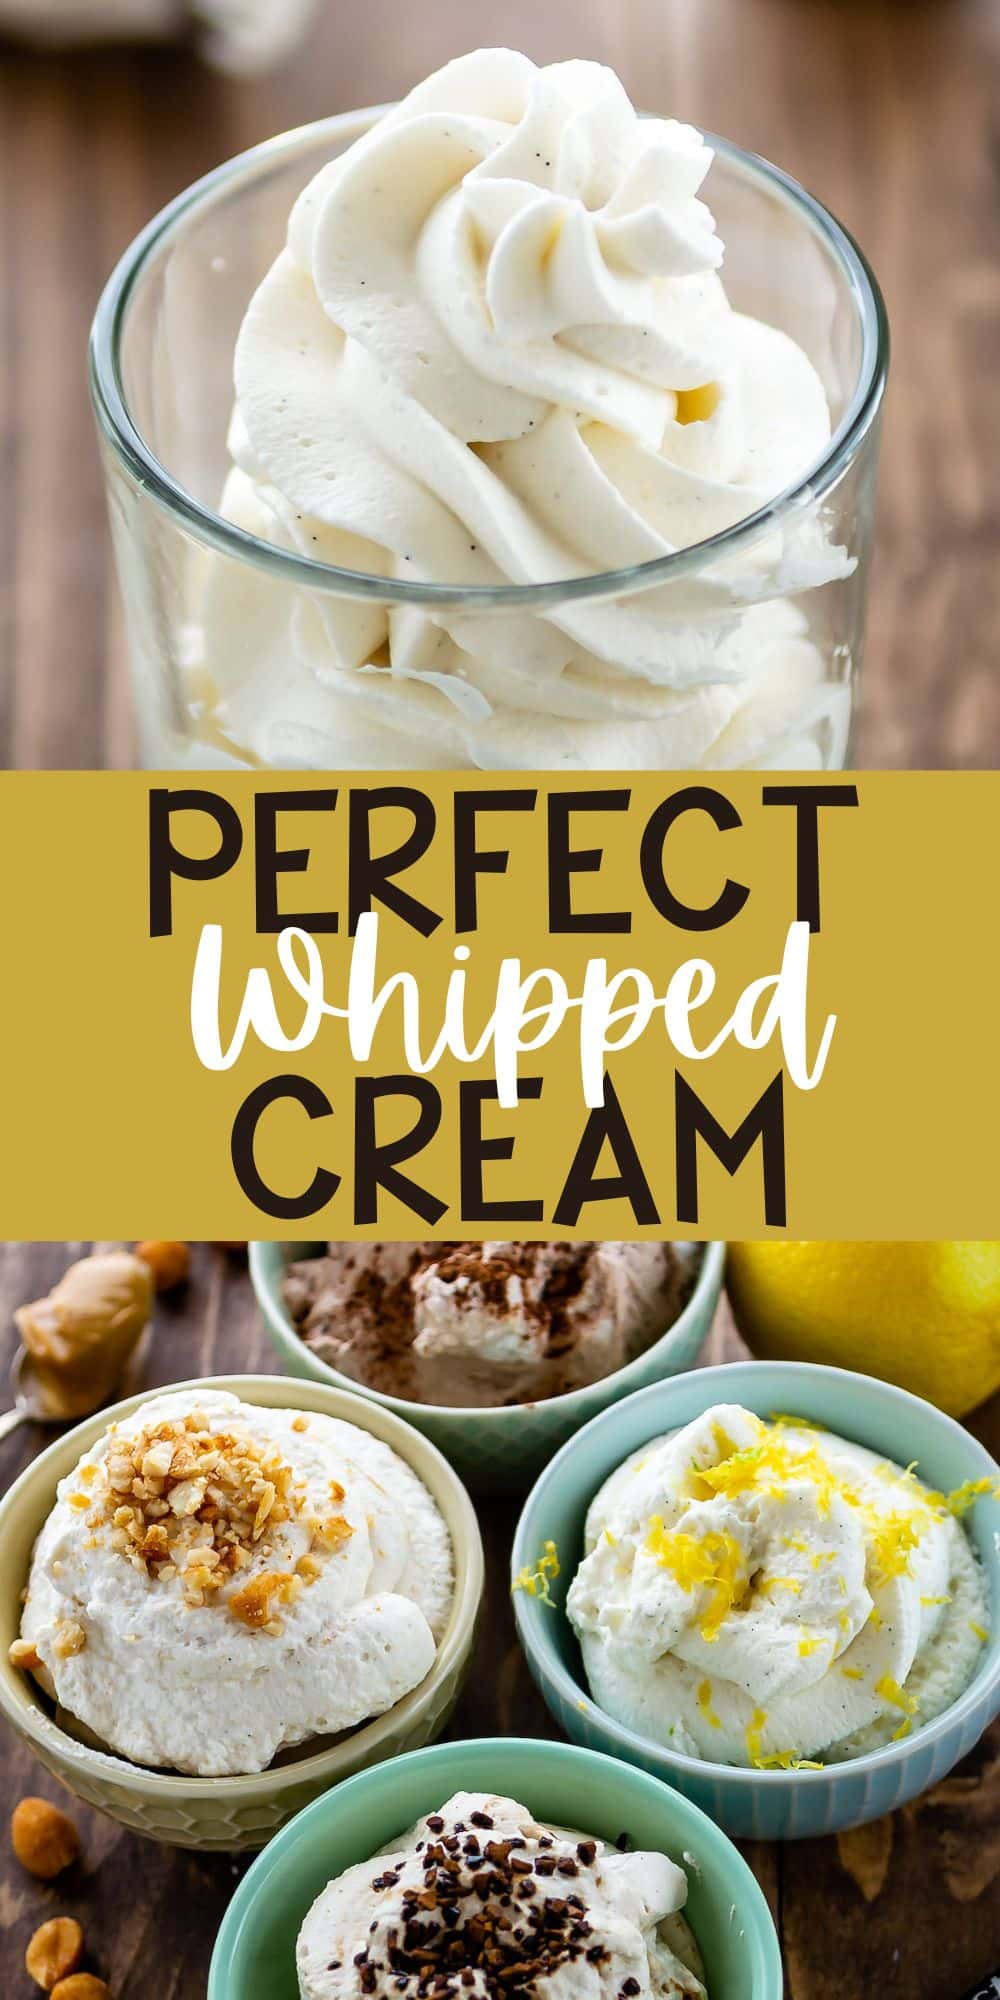 https://www.crazyforcrust.com/wp-content/uploads/2023/02/perfect-whipped-cream_collage.jpg